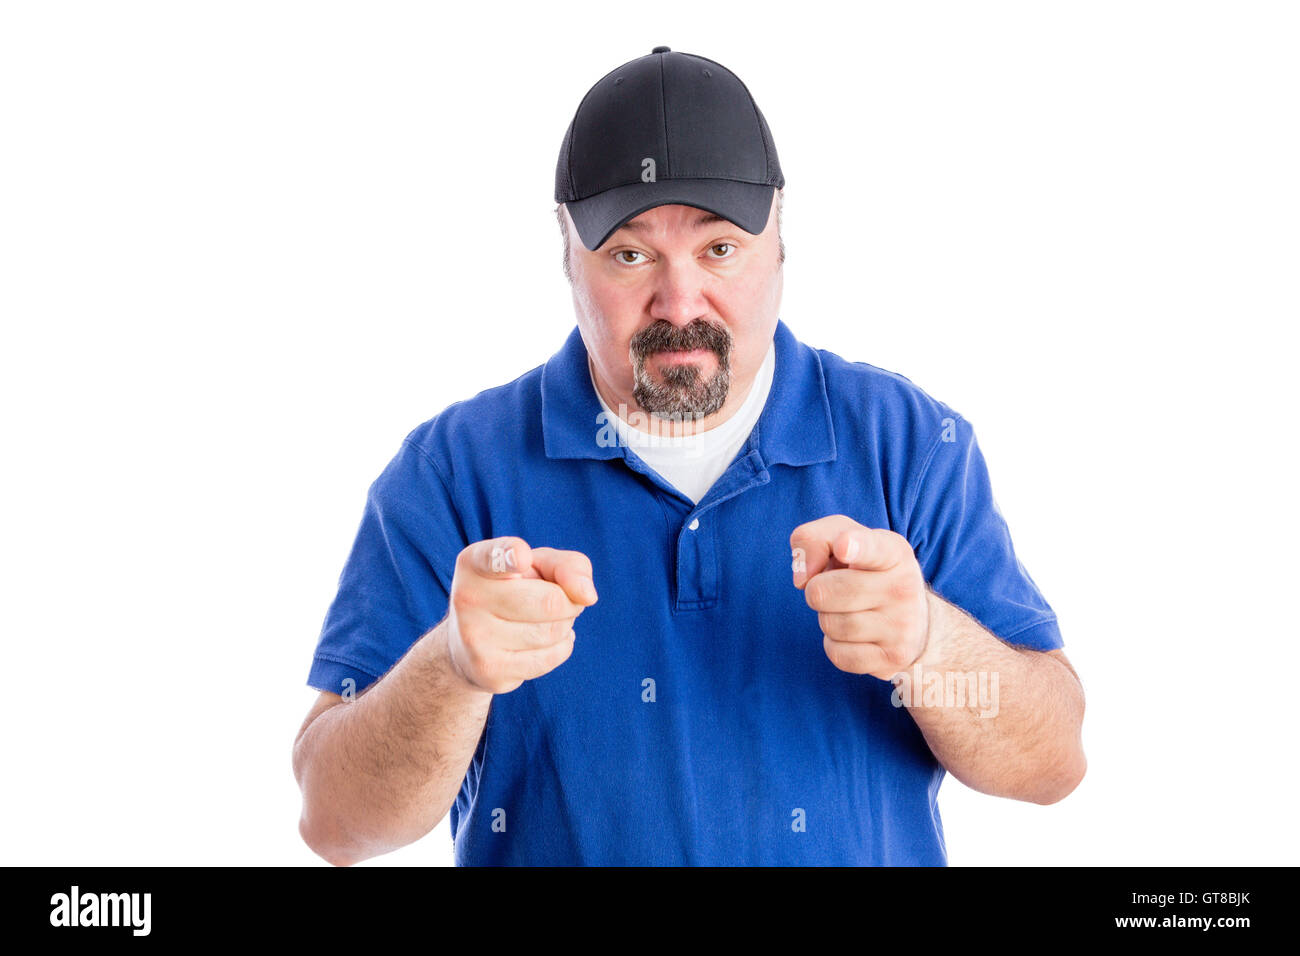 Sceptical casual middle-aged man showing his disbelief pointing at the camera and raising his eyebrows in distrust, upper body i Stock Photo